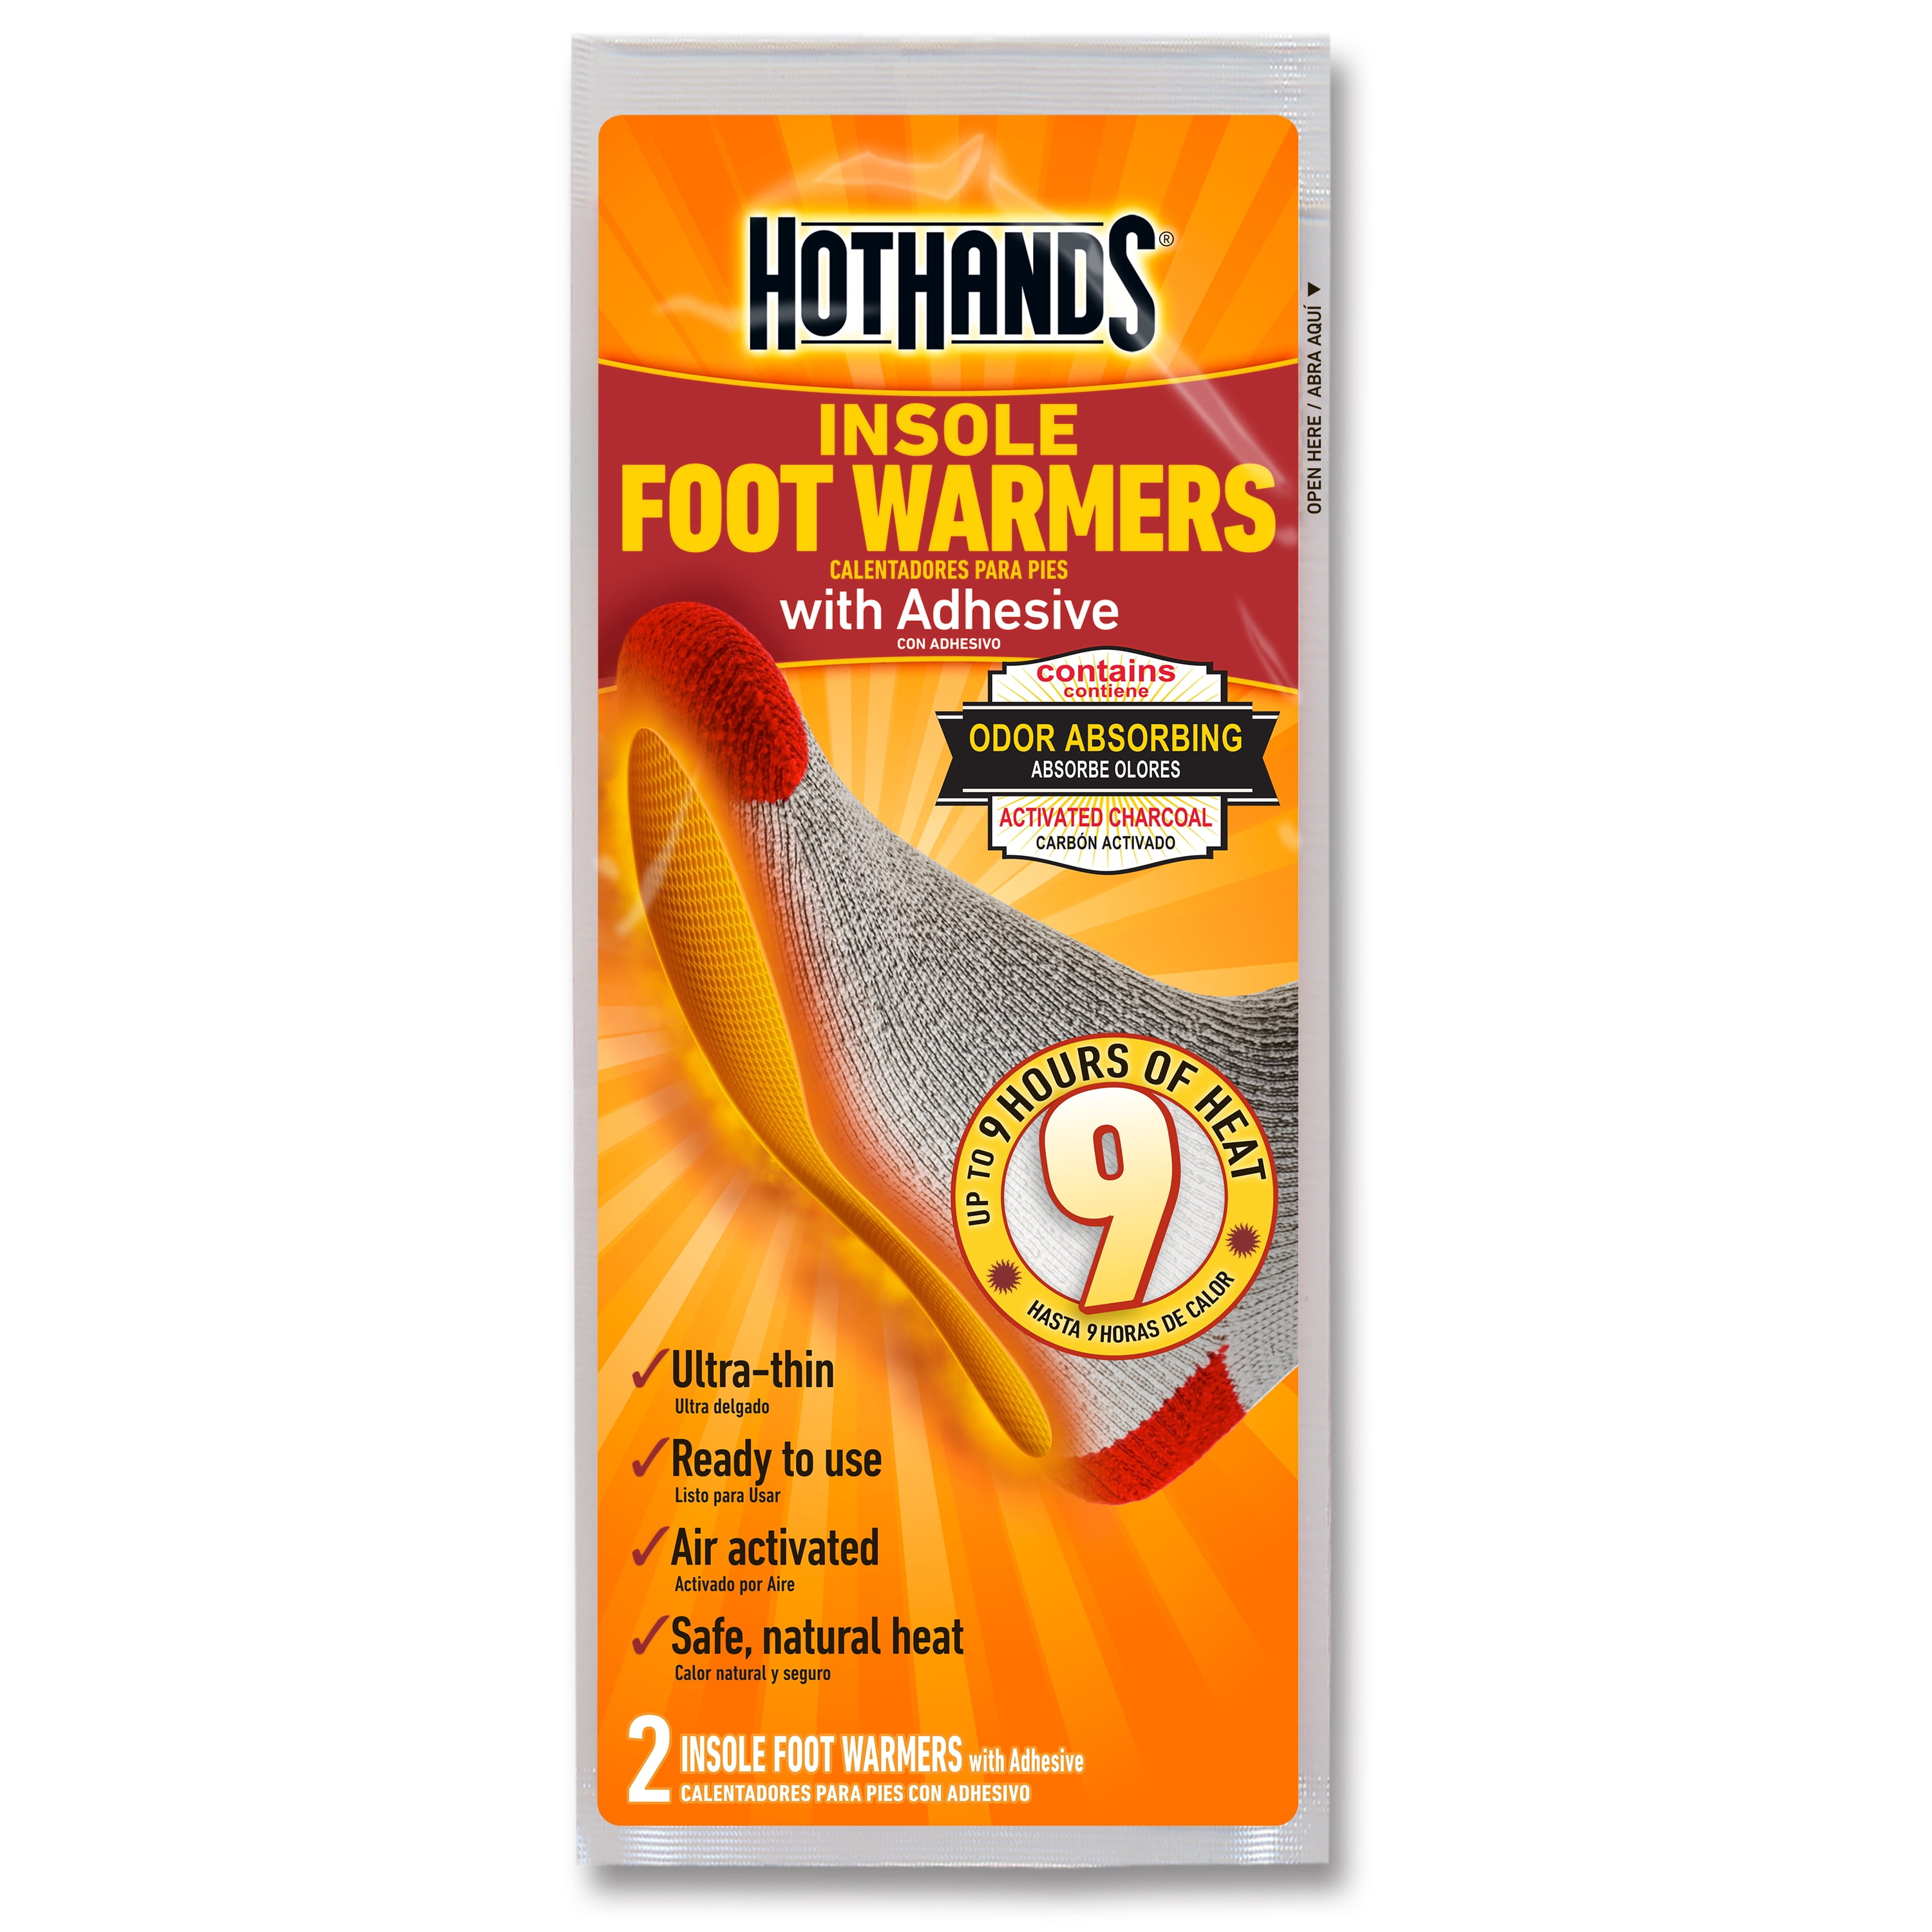 HotHands Insole Foot Warmer 5 Pair Value Pack 2019 for sale online